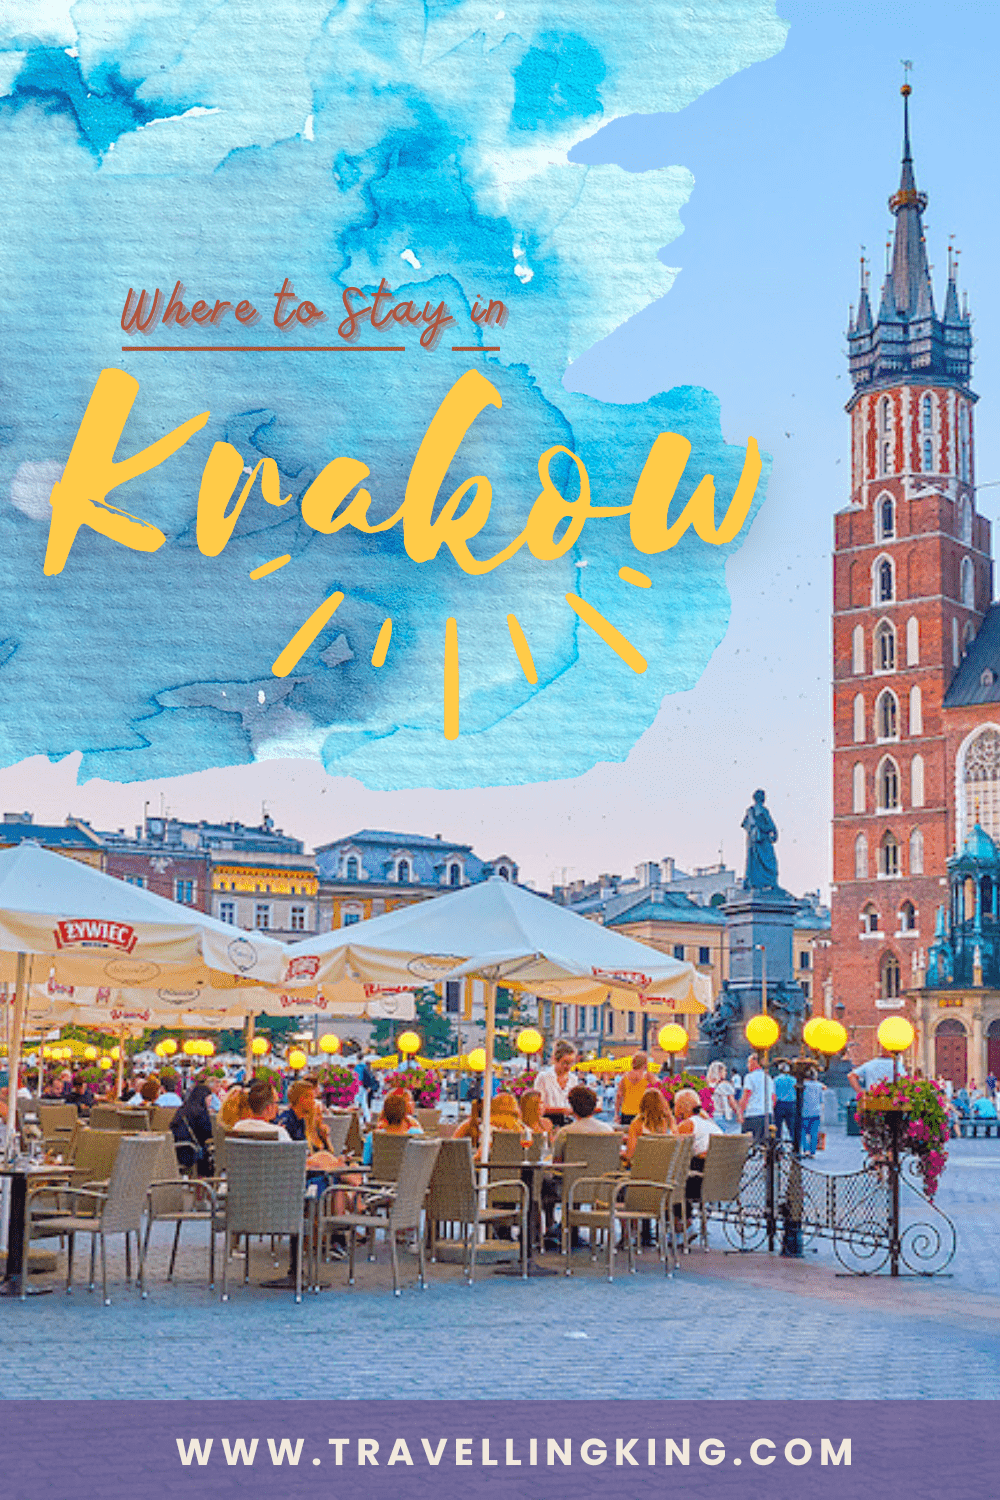 Where to stay in Krakow